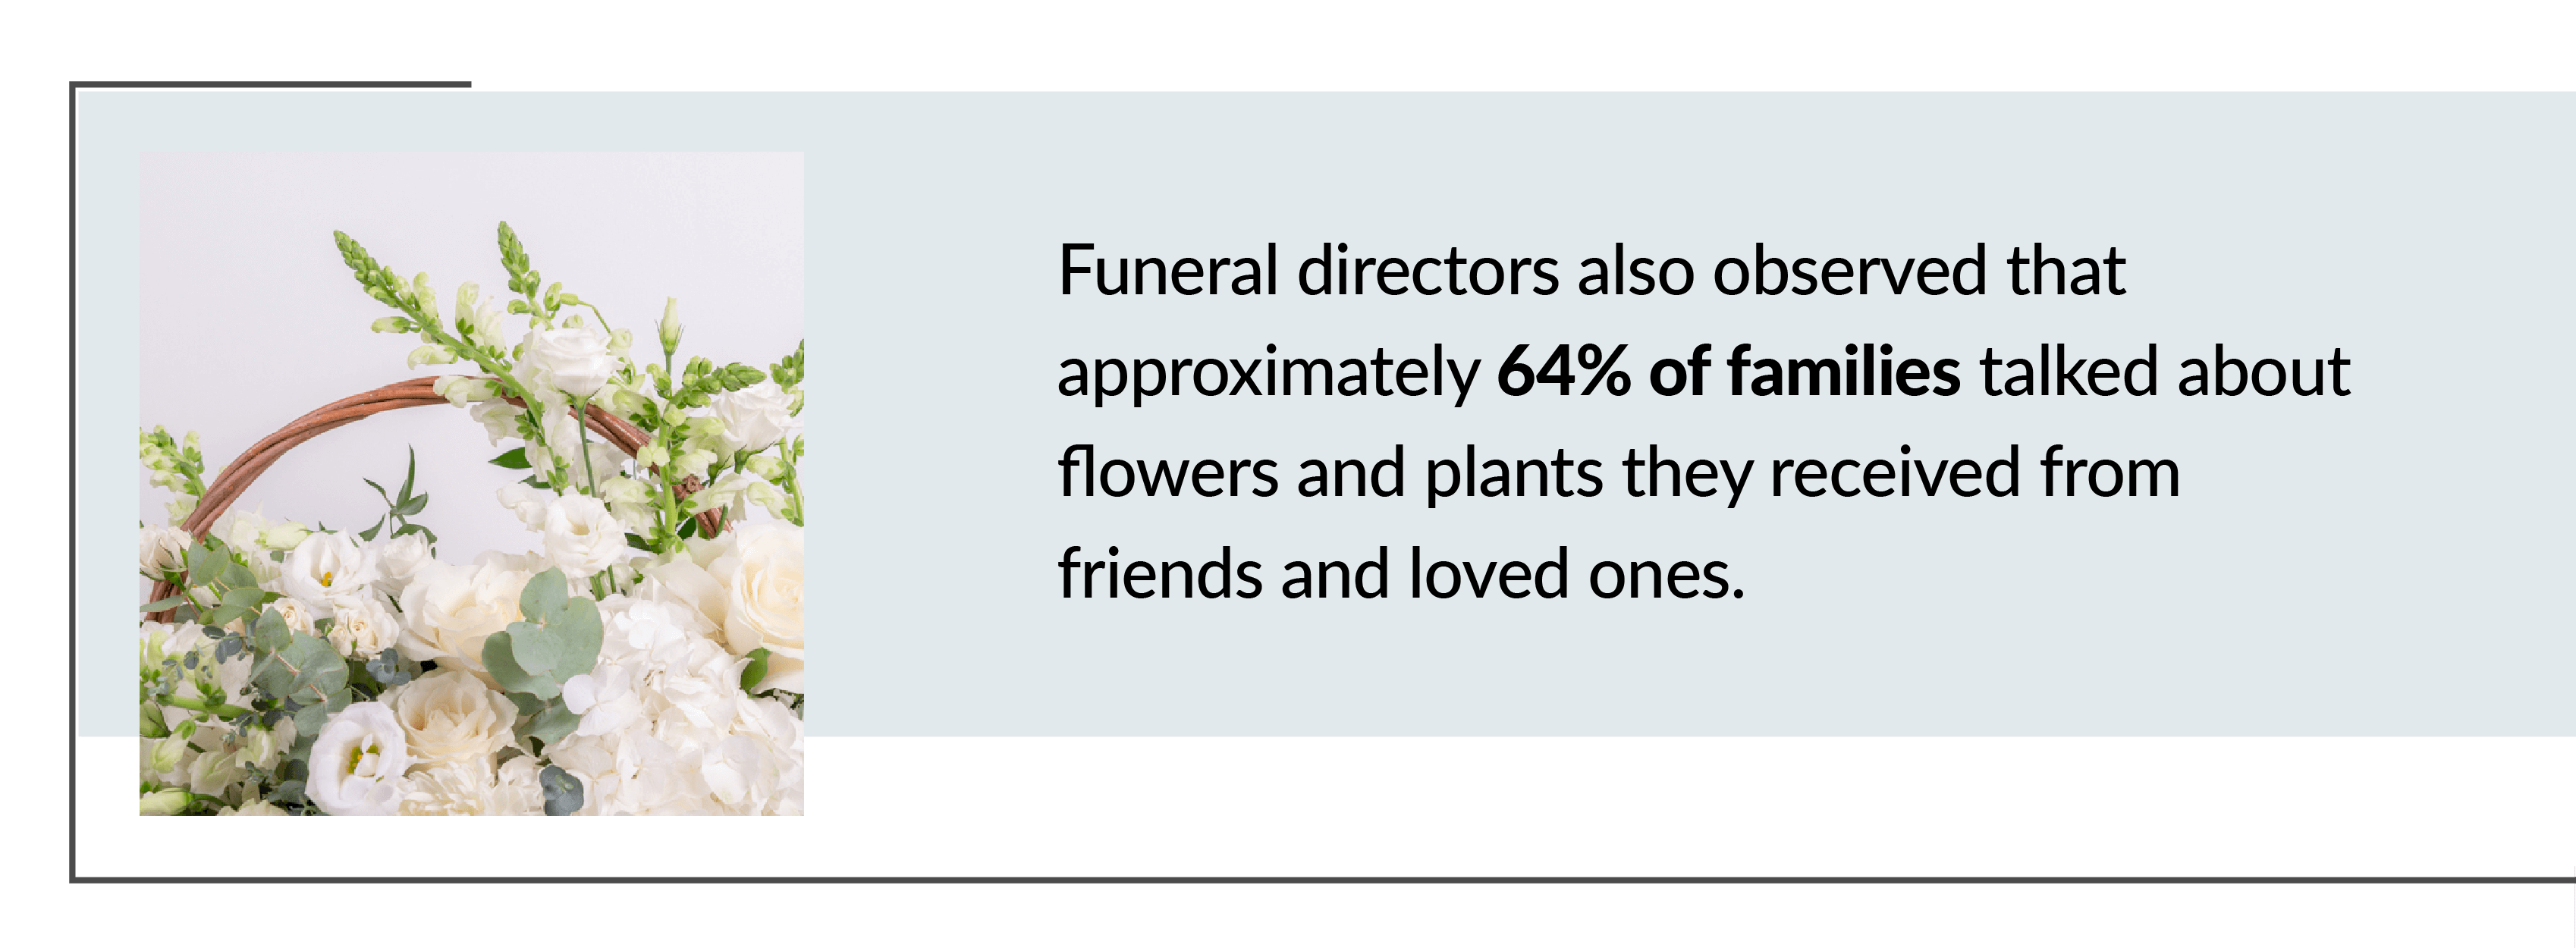 Flowers and plants received at a funeral